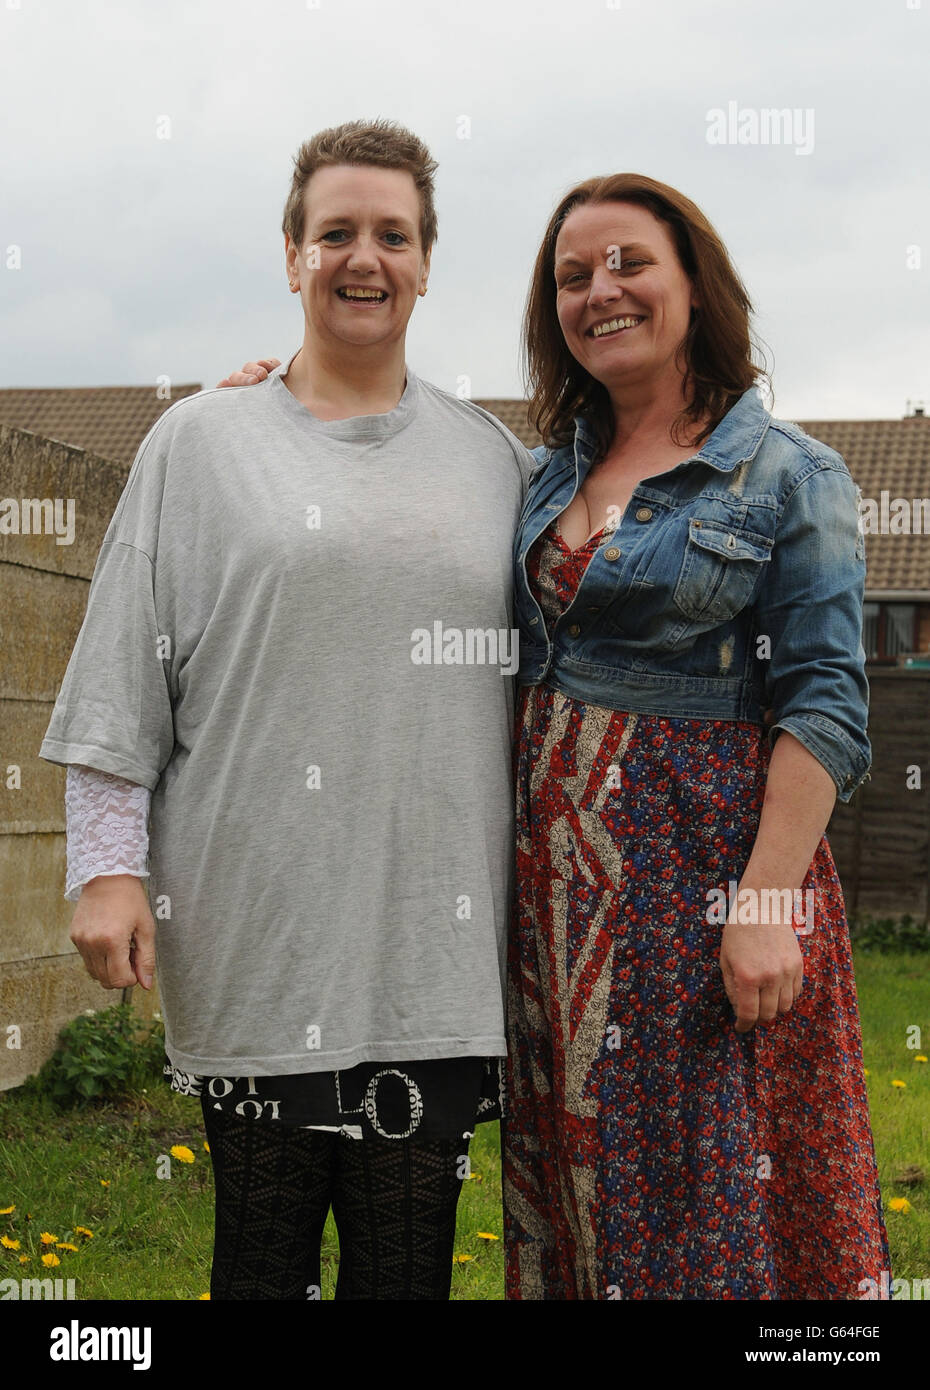 Denise Petty, 42, from Walsall (left) with her Weight Watchers leader Bev Longsden, 43, after losing an incredible 21 stone after being referred to Weight Watchers by her doctor. Stock Photo